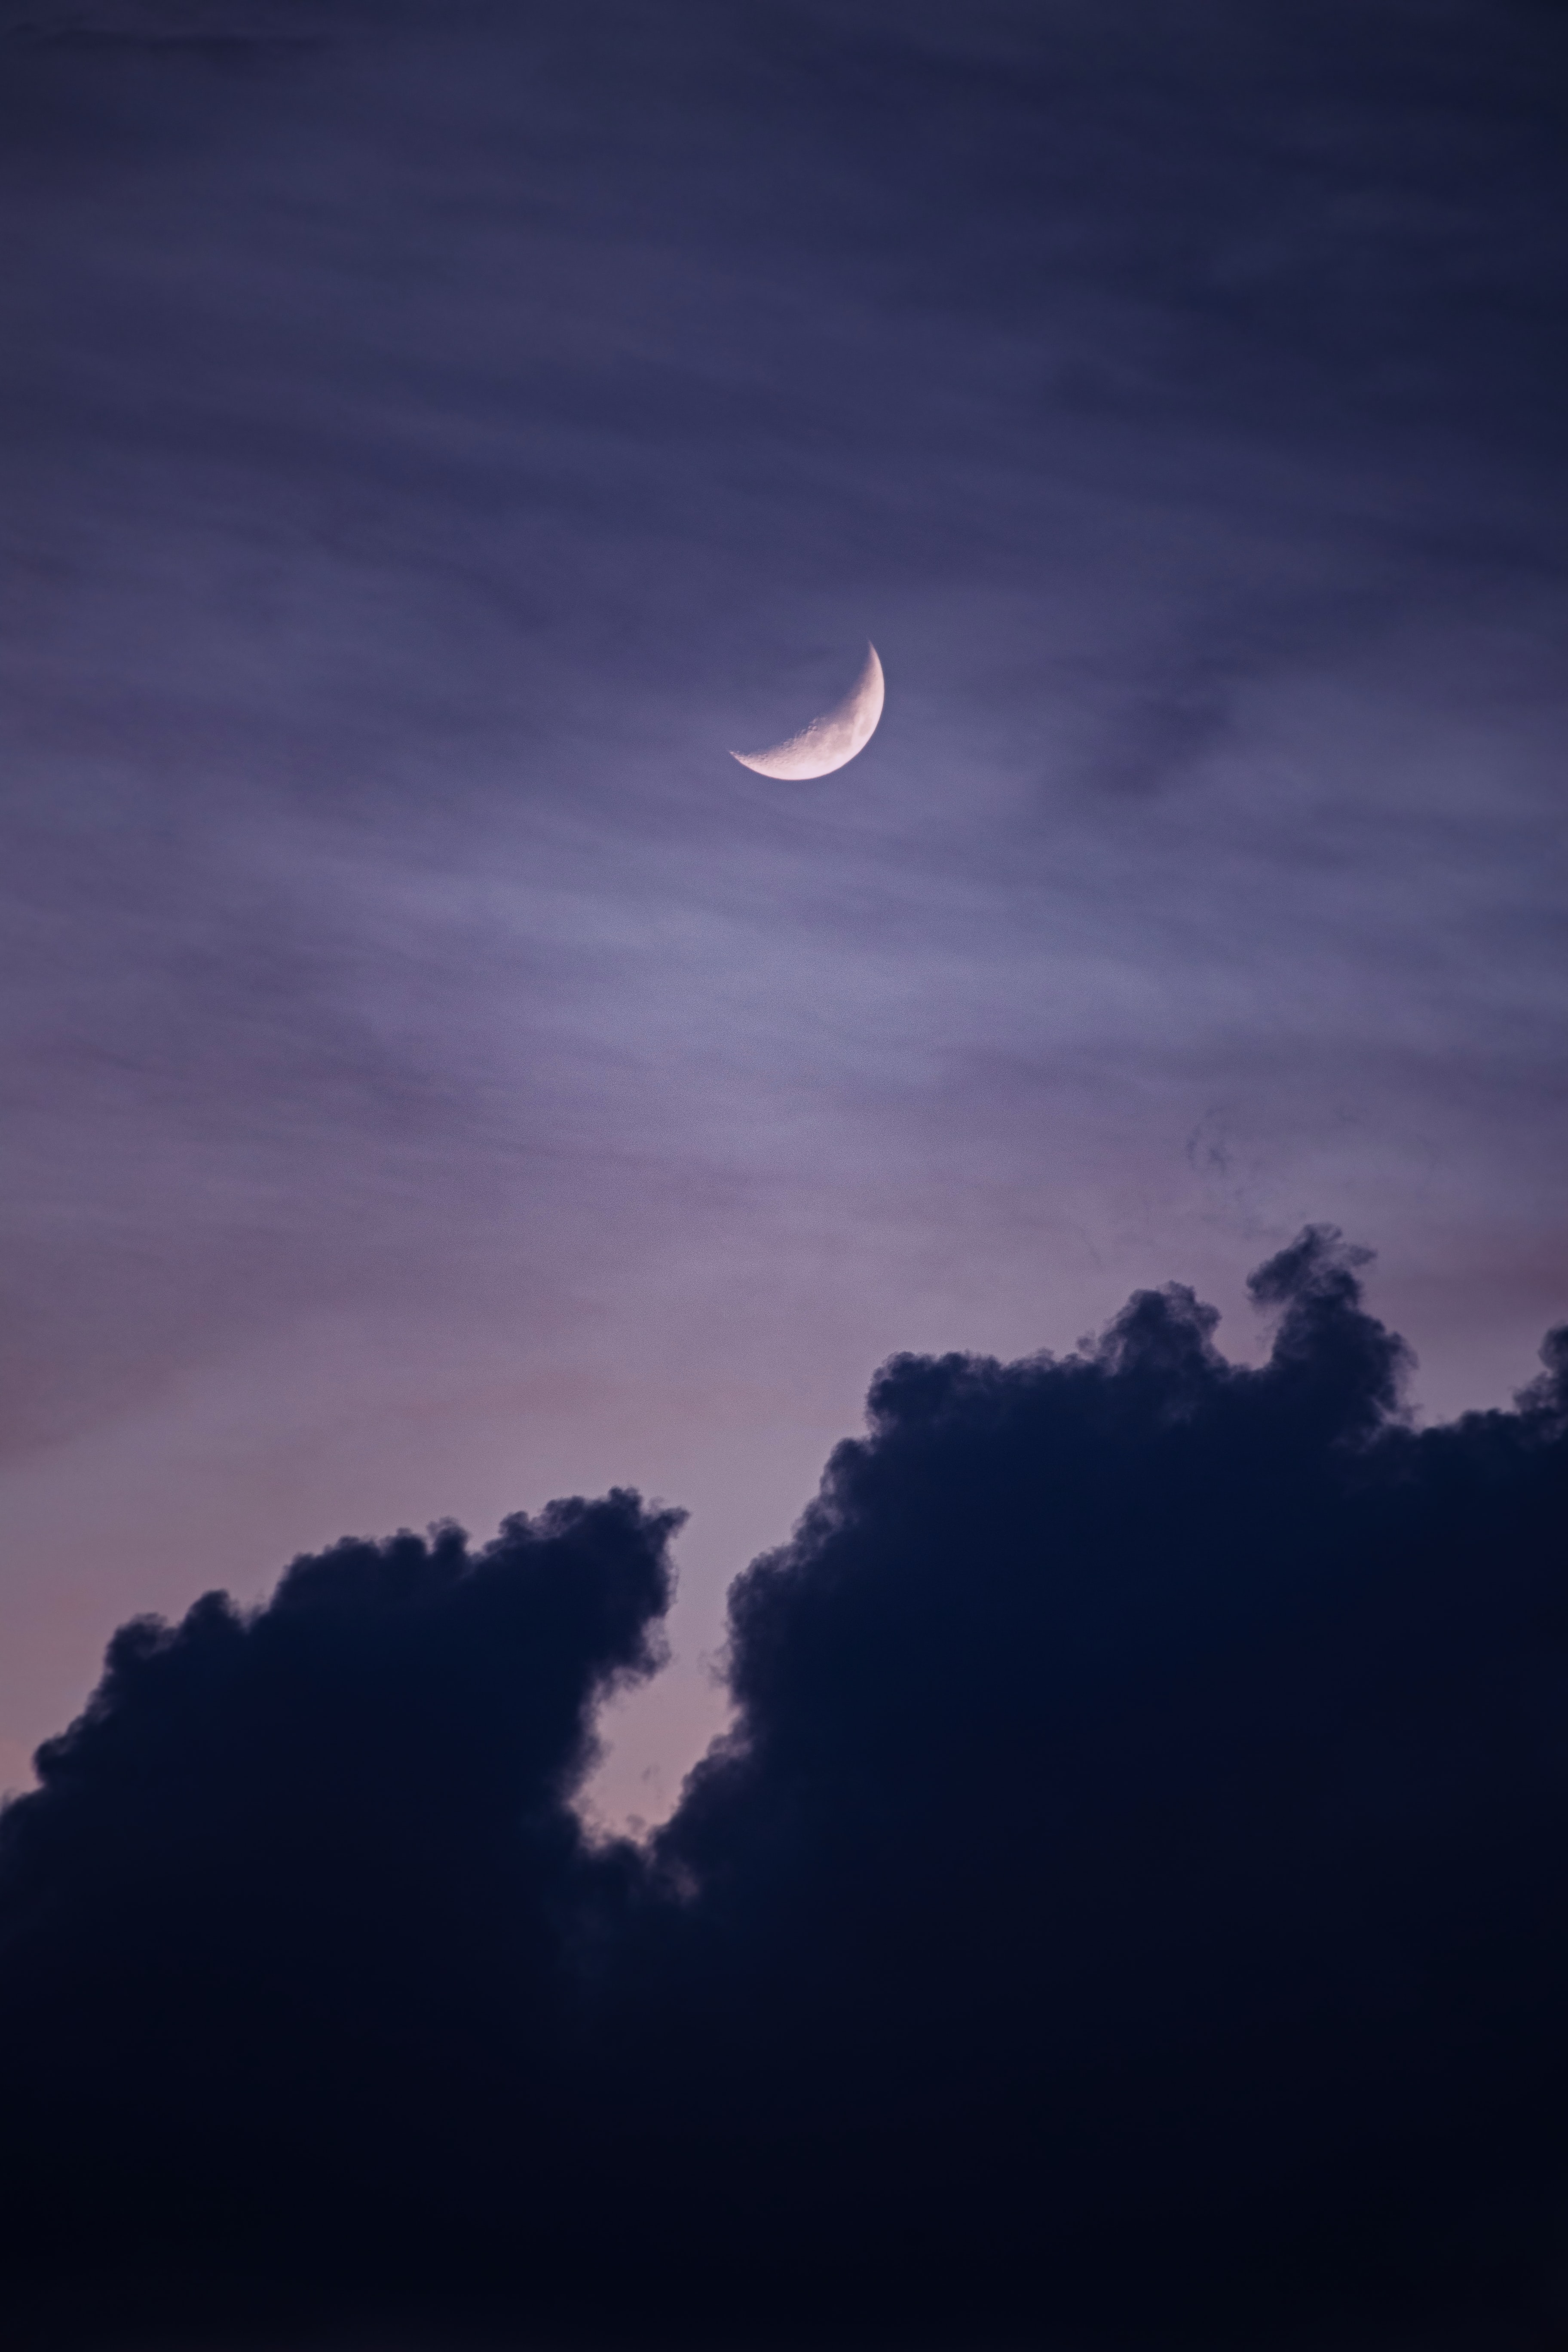 mainly cloudy, nature, sky, clouds, moon, overcast